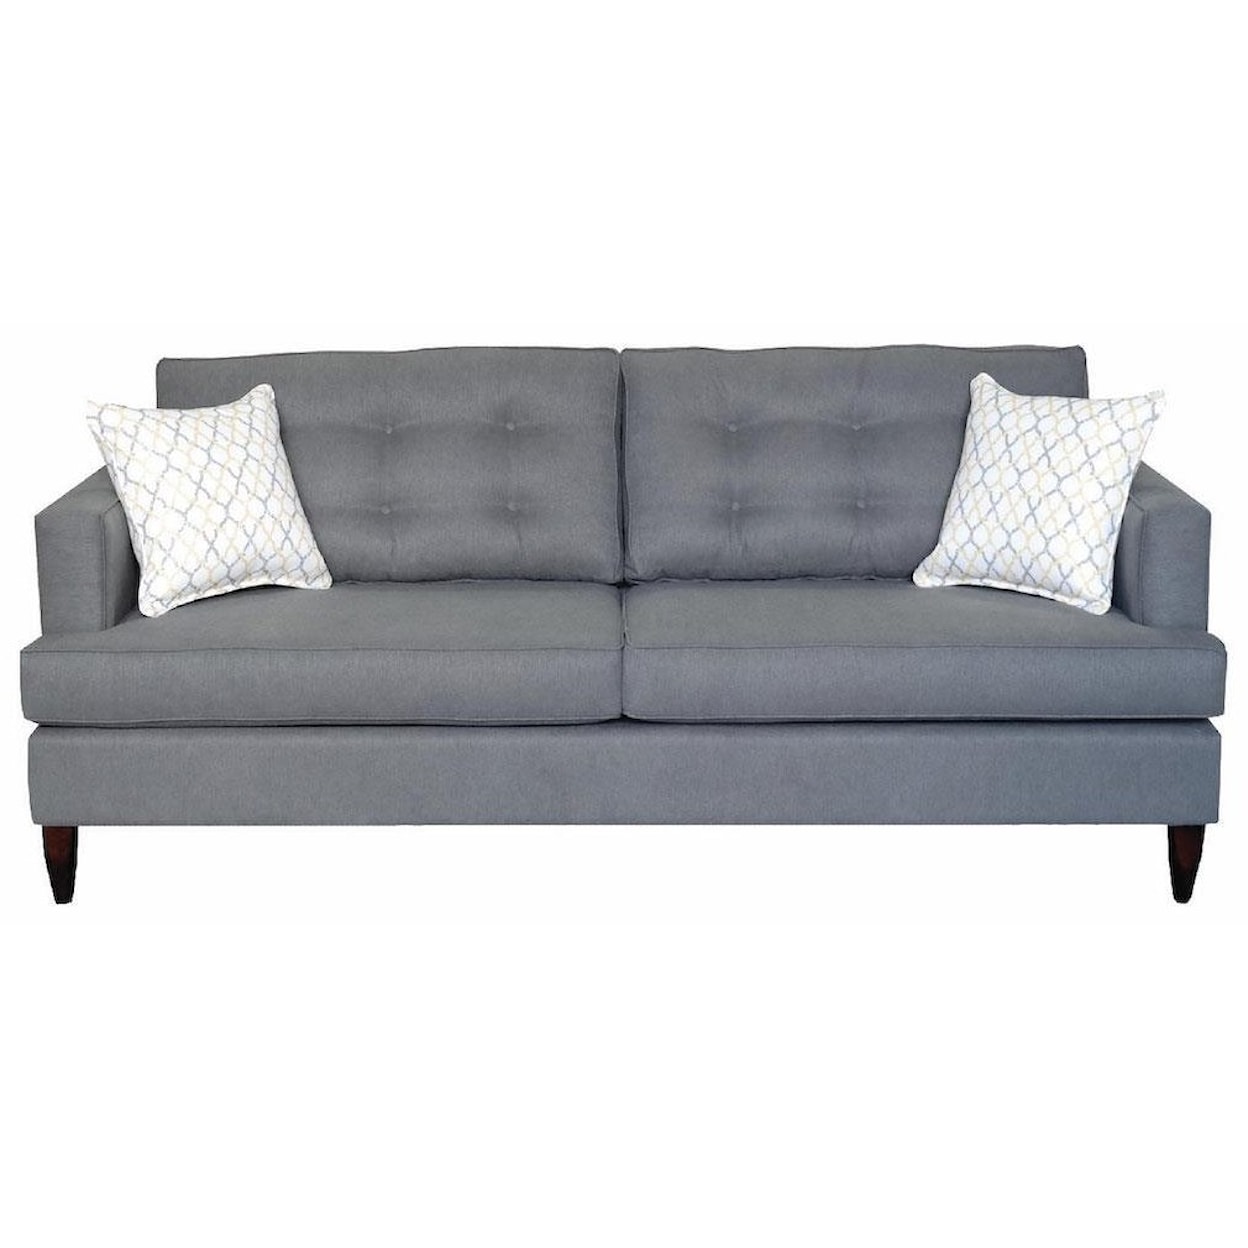 Sussex Upholstery Co. Miles 2 Cushion Sofa